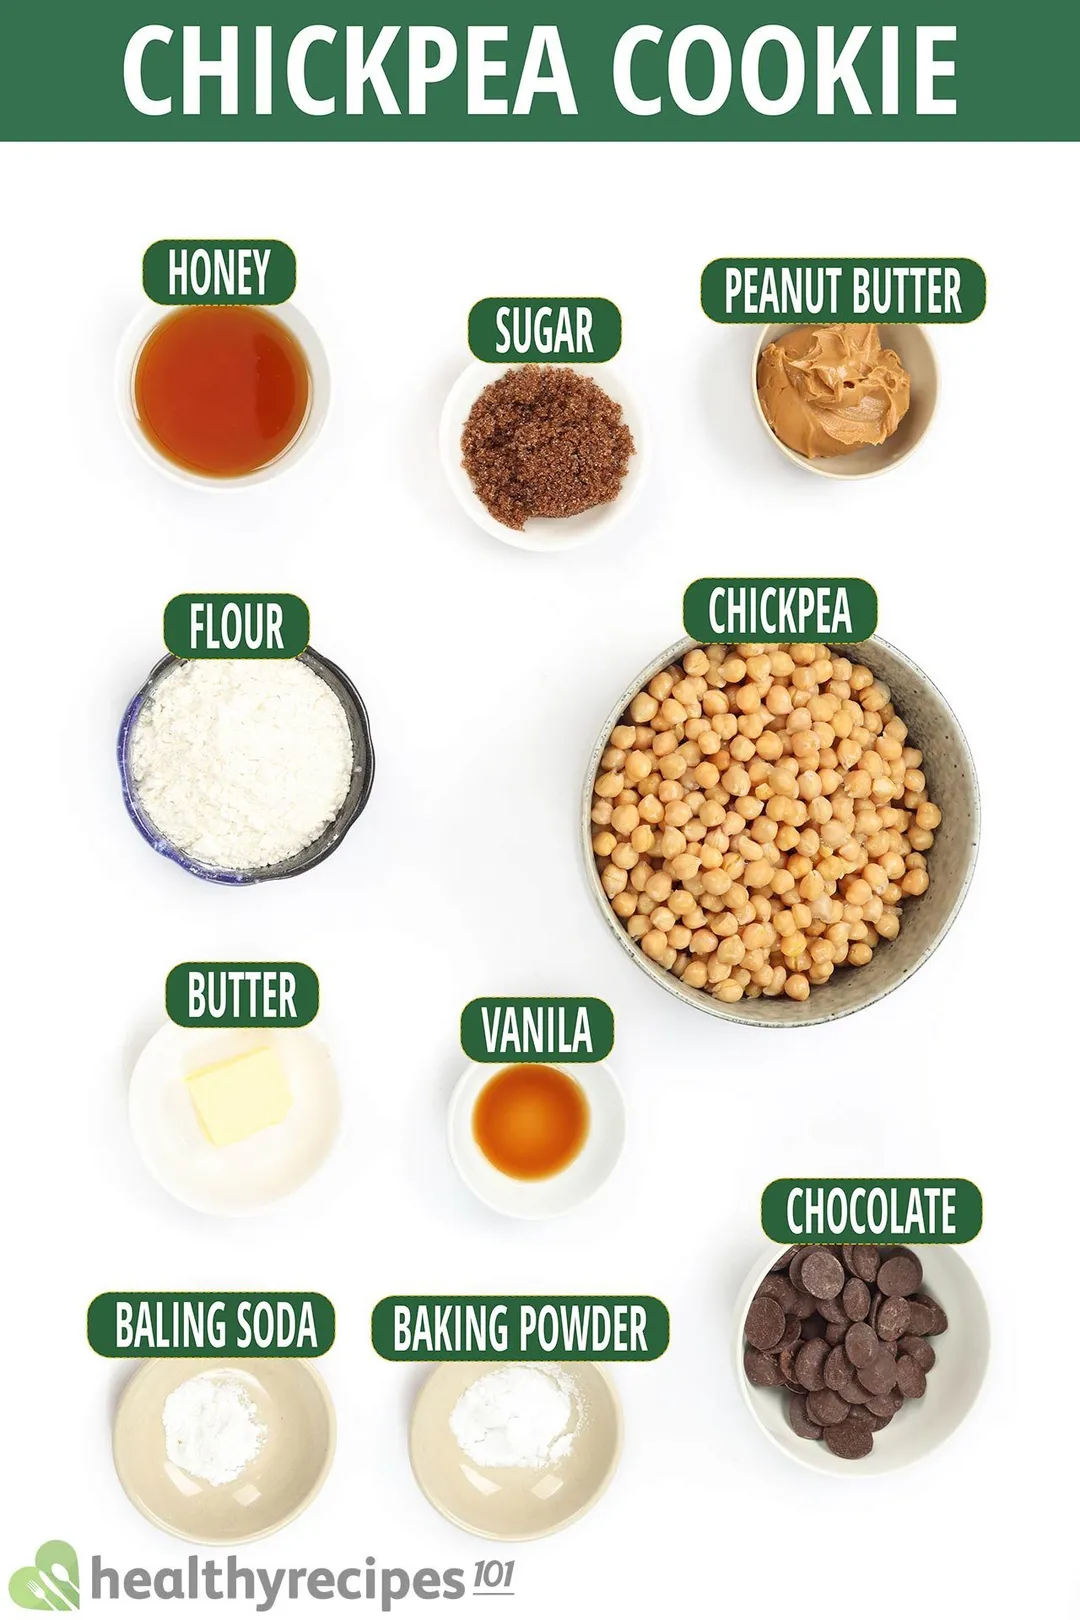 Ingredients for chickpea cookies, including a bowl of chickpeas, bowls of sugar, peanut butter, honey, chocolate chips, and other ingredients.